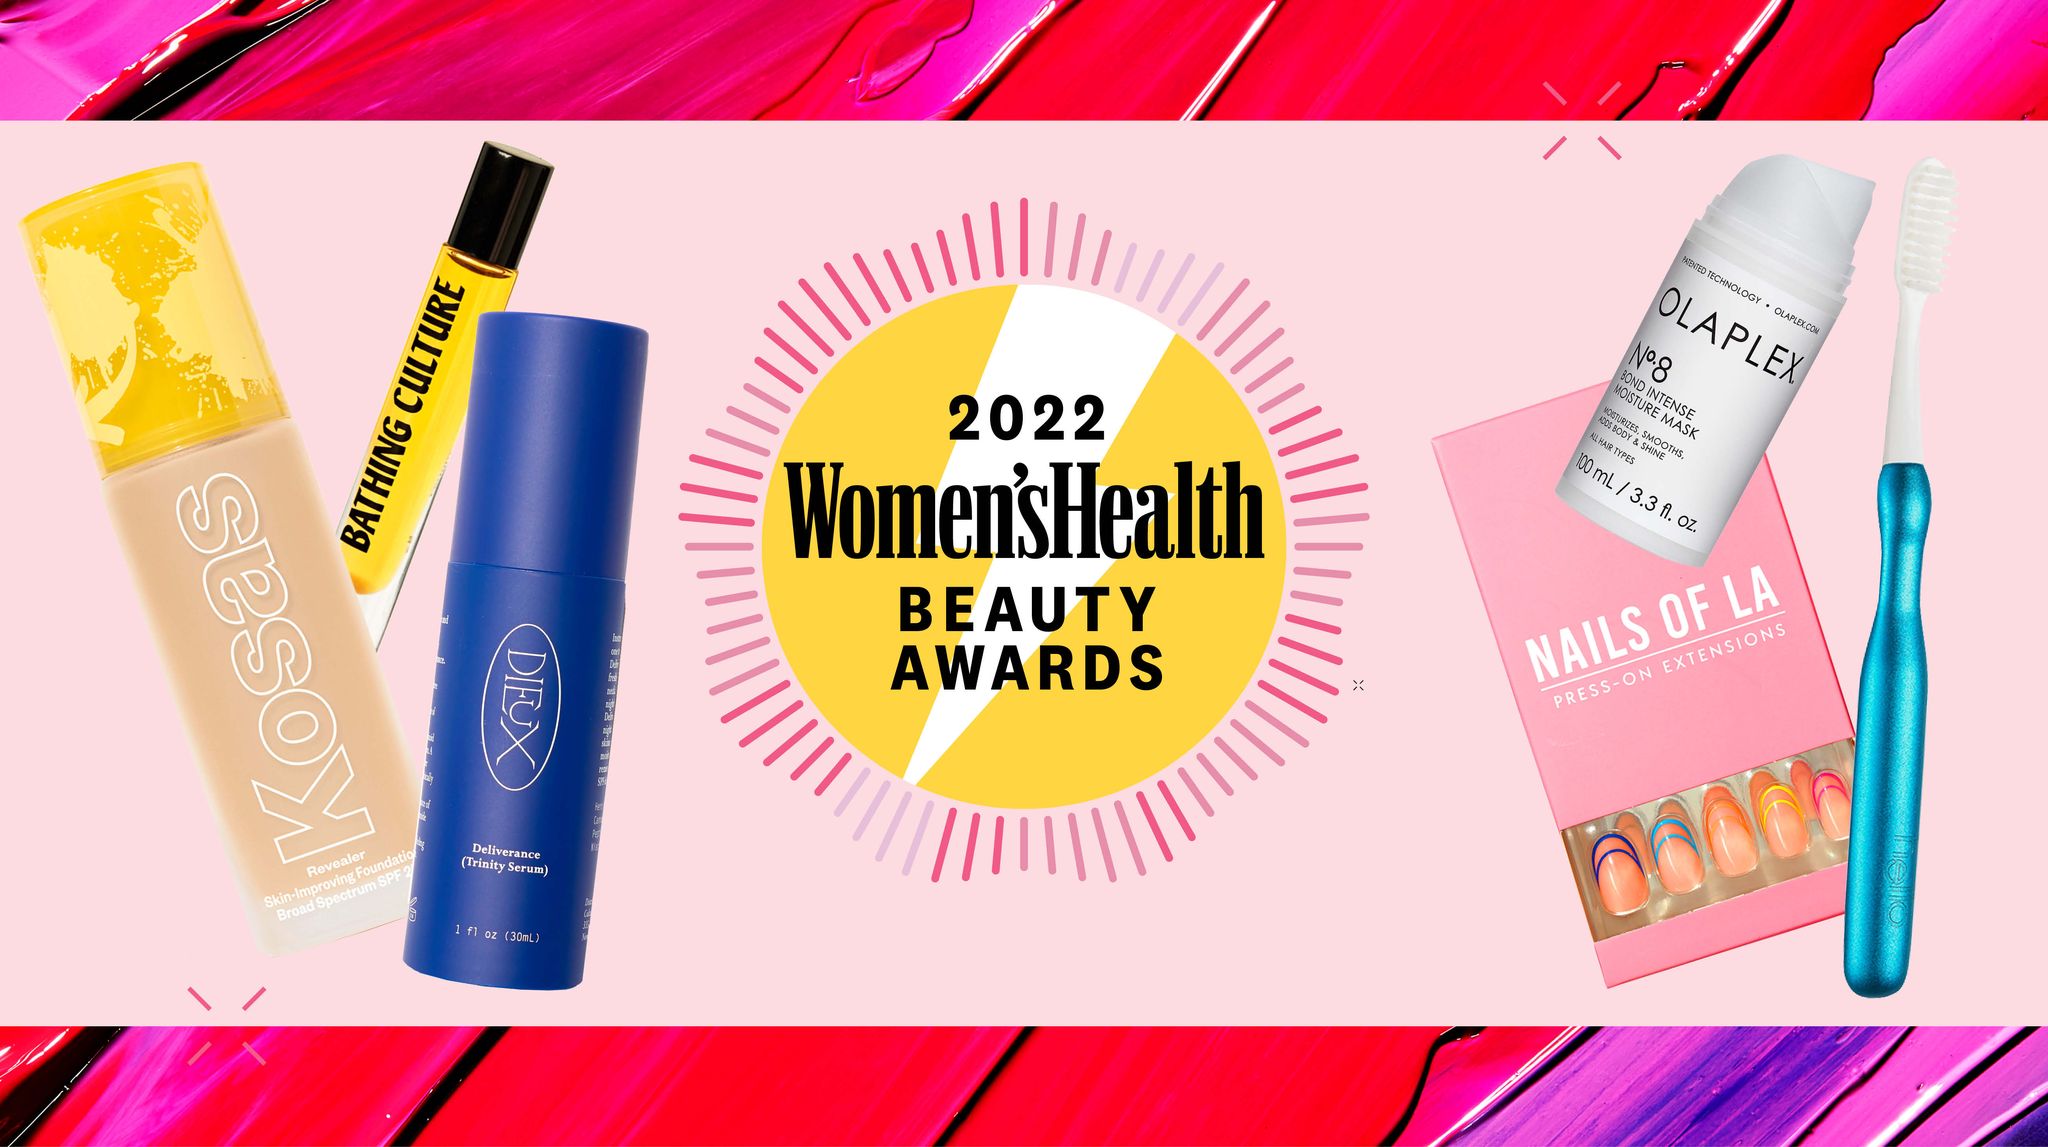 Shape Beauty Awards 2022: The Best Skin, Hair, Makeup, and Body Products